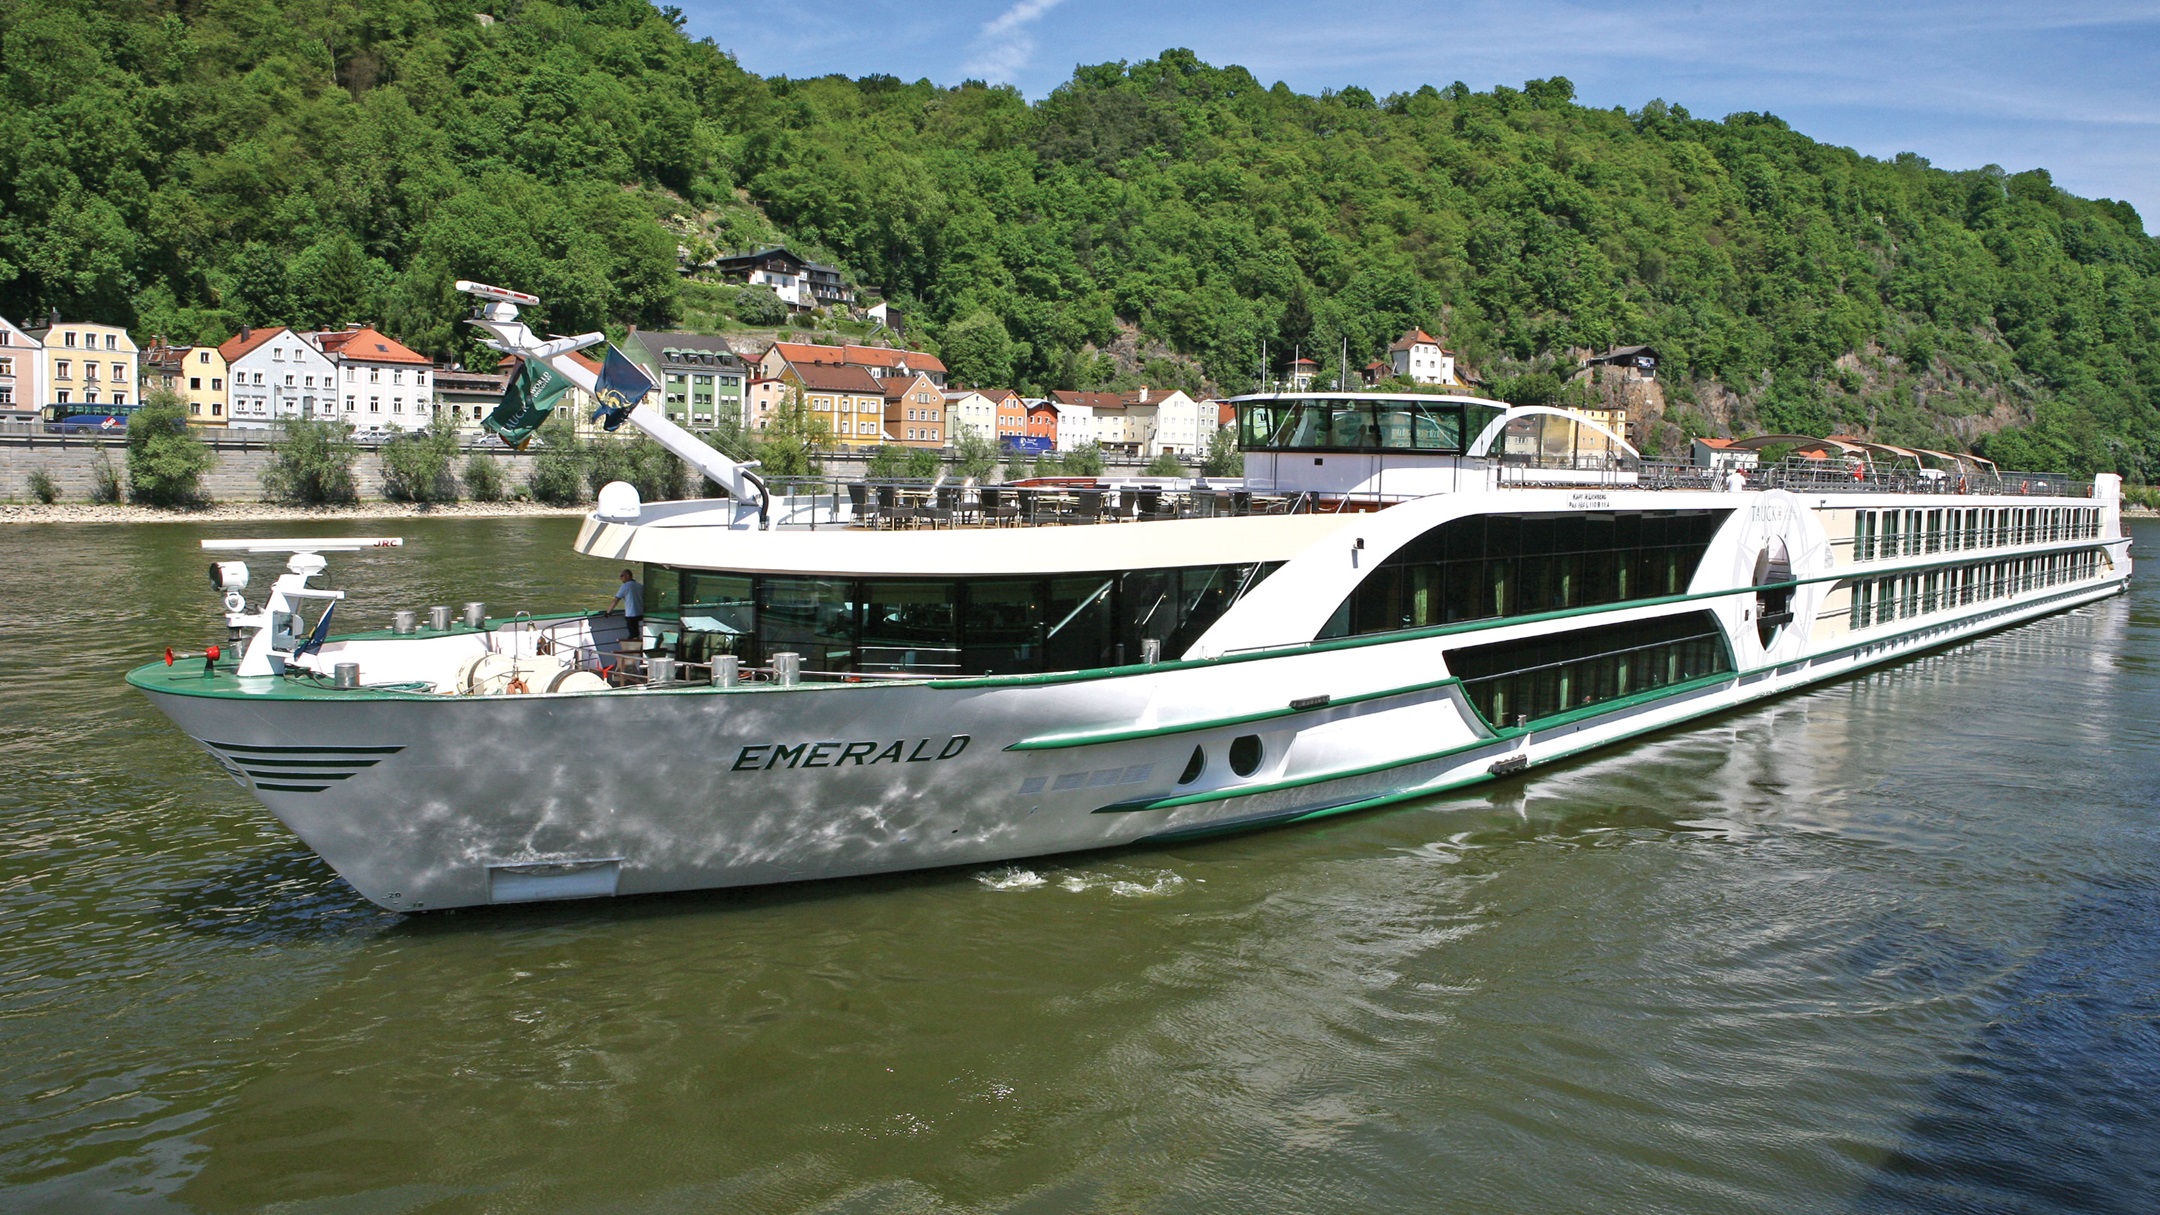 do tauck river cruise ships have balconies